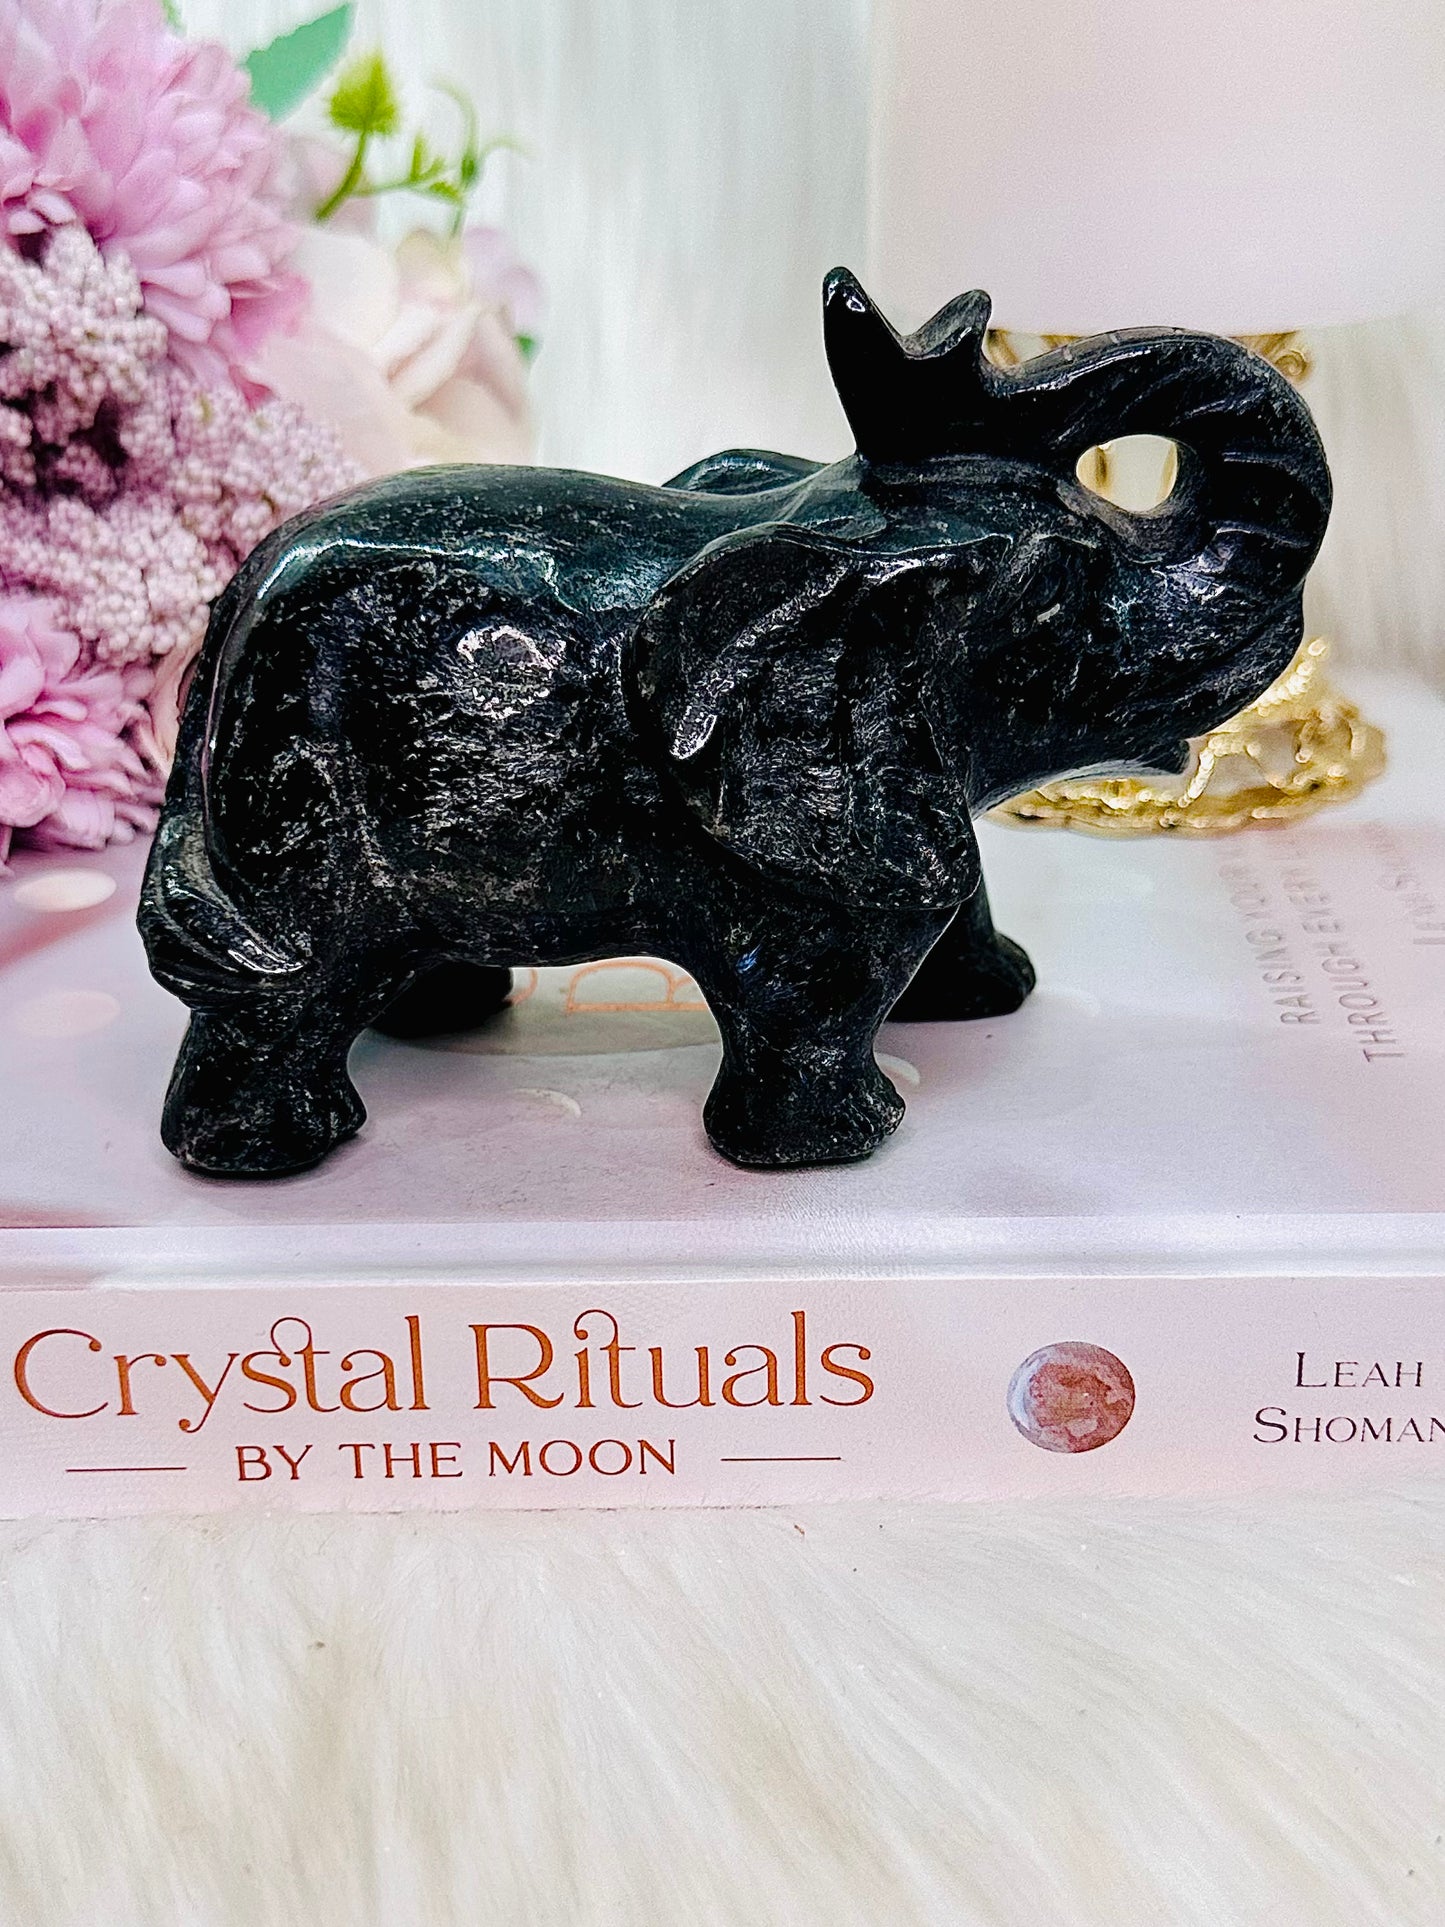 What A Beauty!! Gorgeous Carved Large 498gram Astrophyllite Elephant with Beautiful Blue Flash